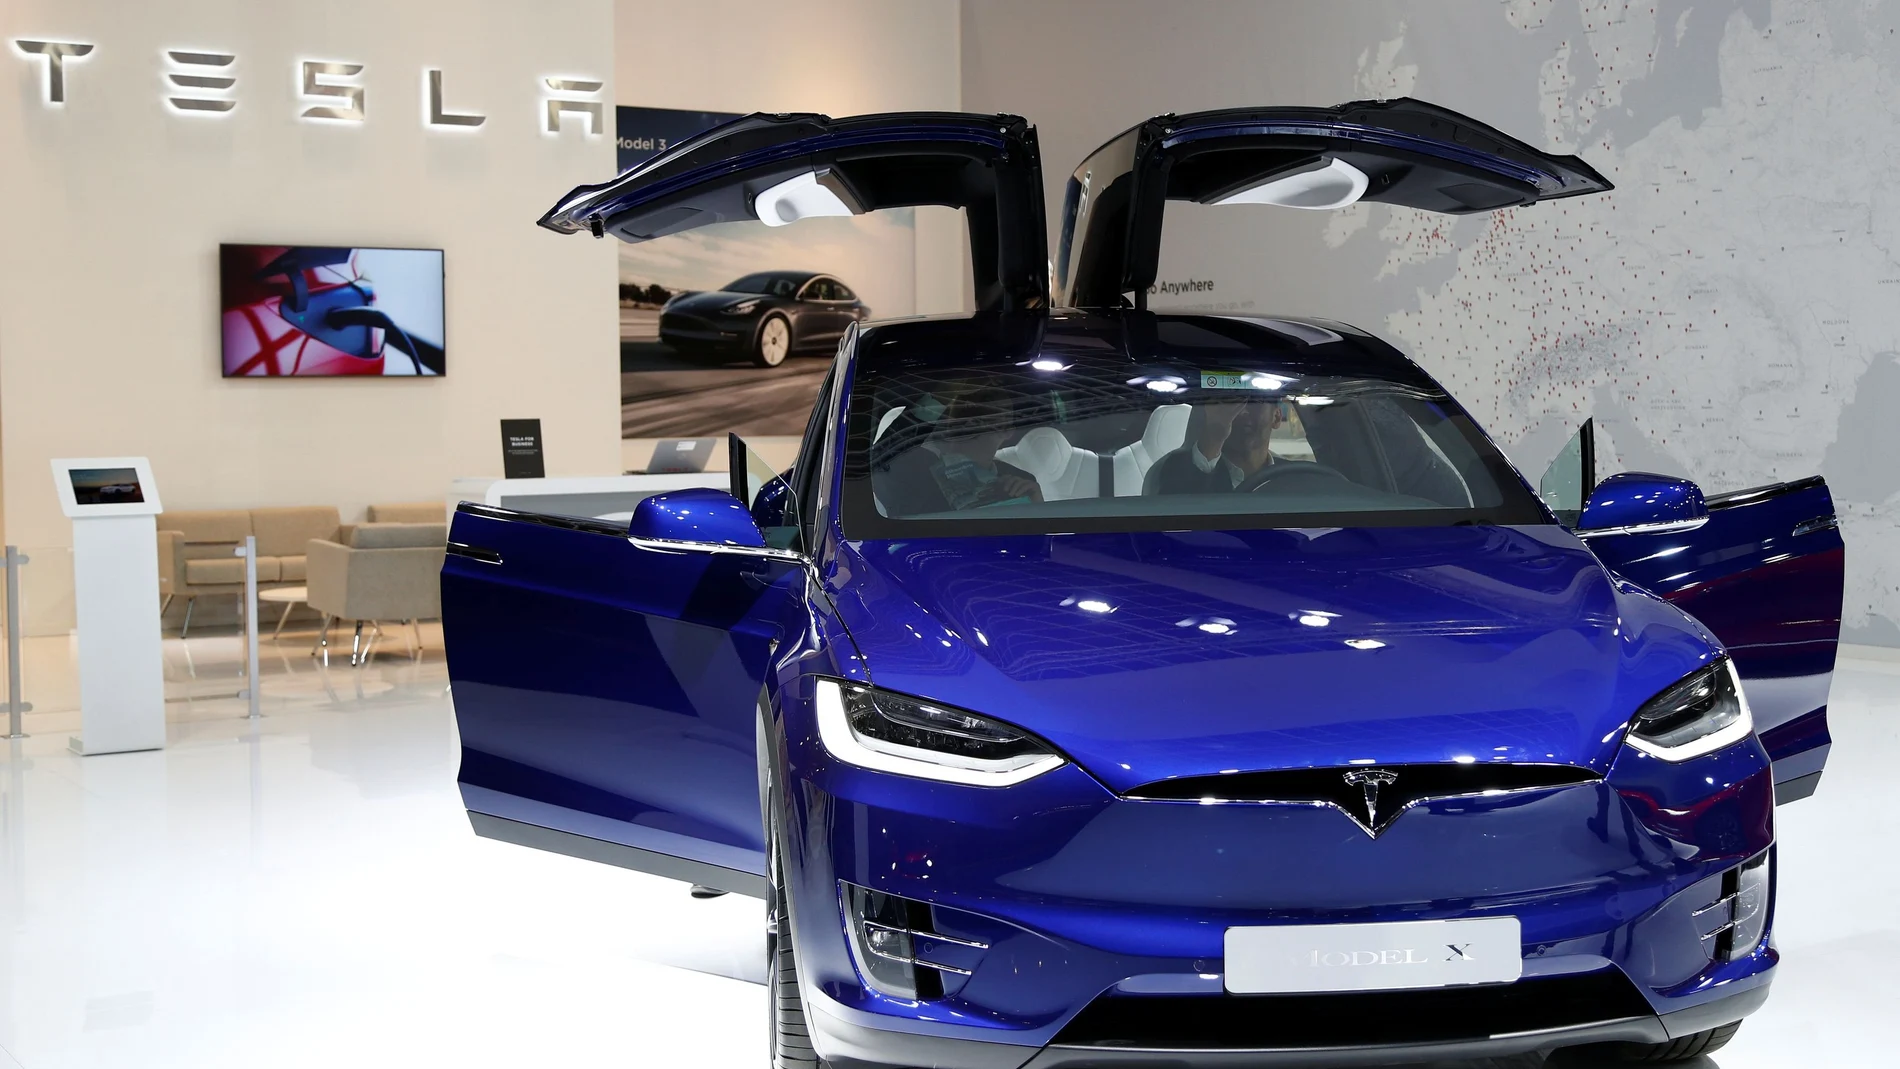 A Tesla Model X electric car is seen at Brussels Motor Show